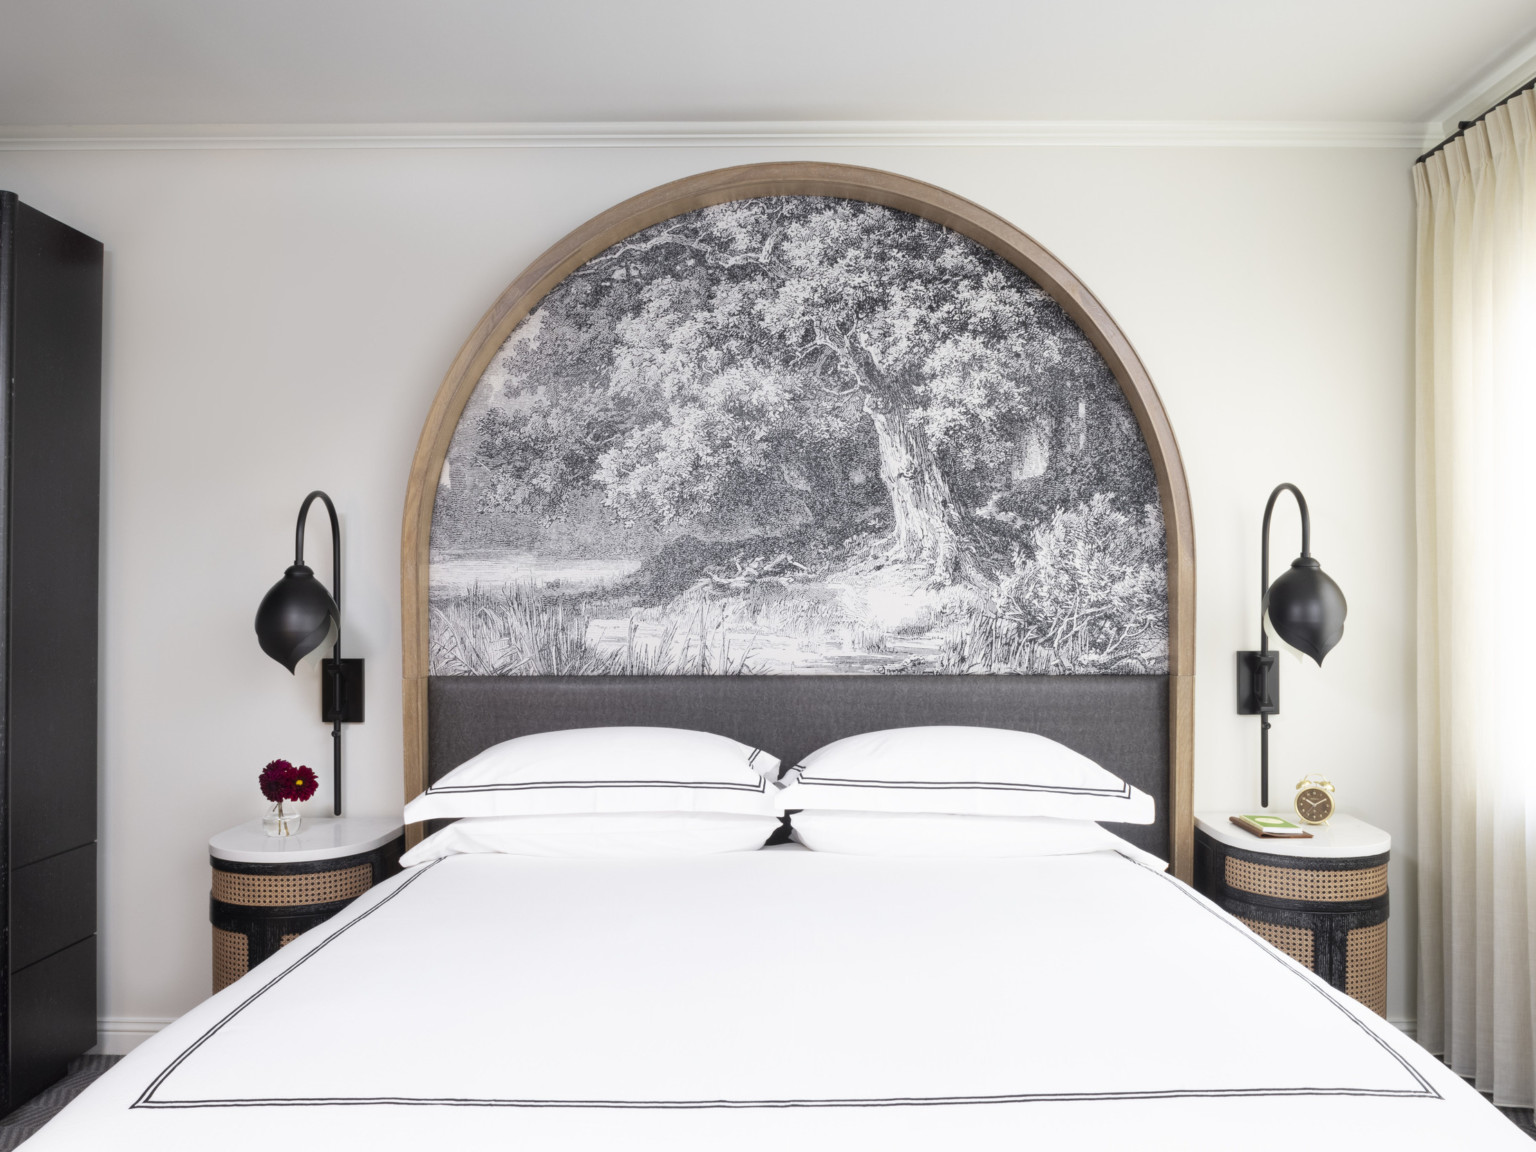 Bed with white comforter framed by wooden arch over bed frame with black and white tree mural. Bedside tables at each side